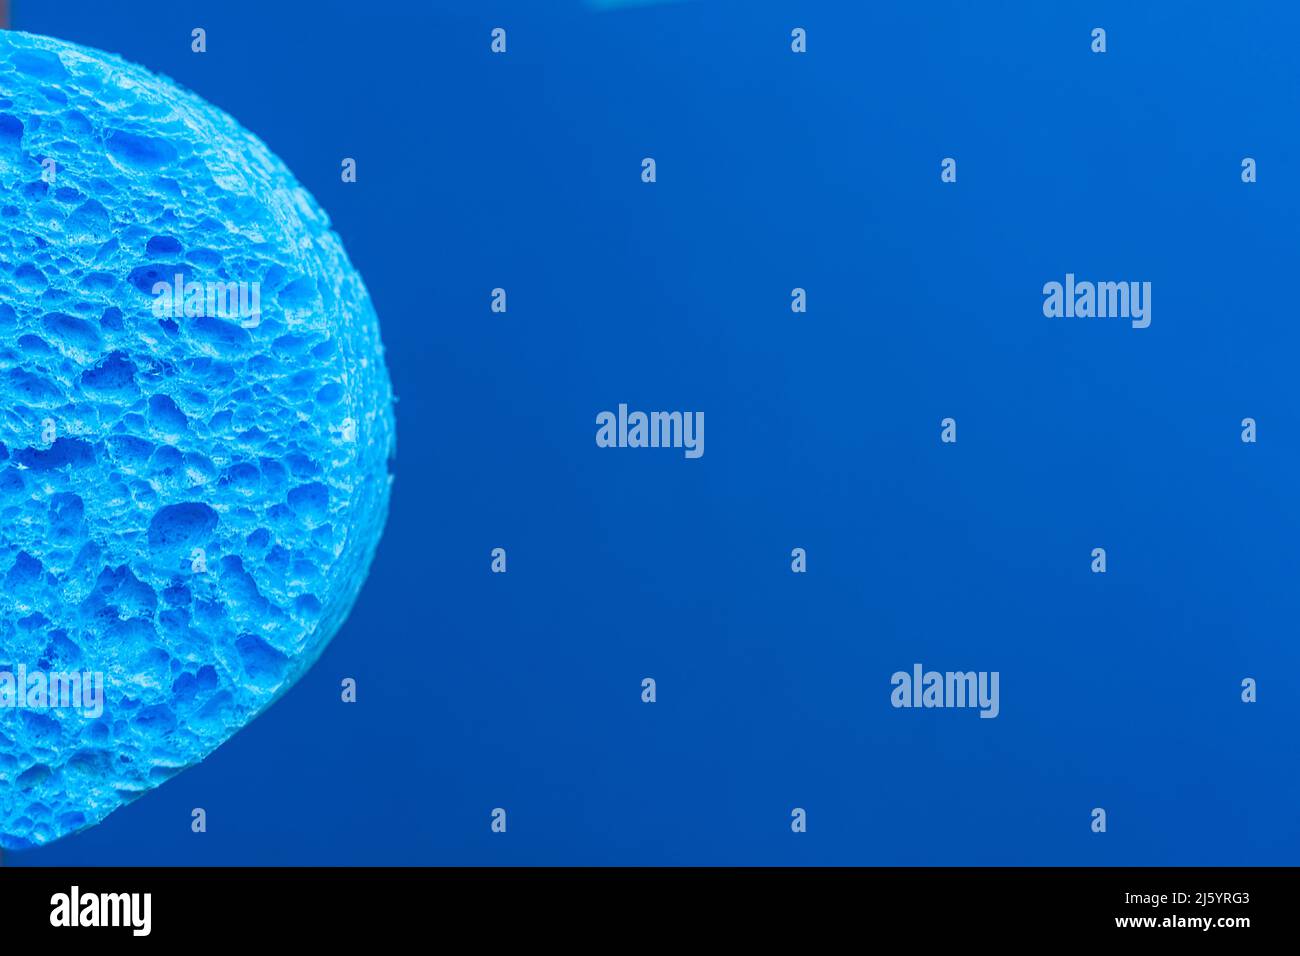 a blue sponge in front of a blue background Stock Photo